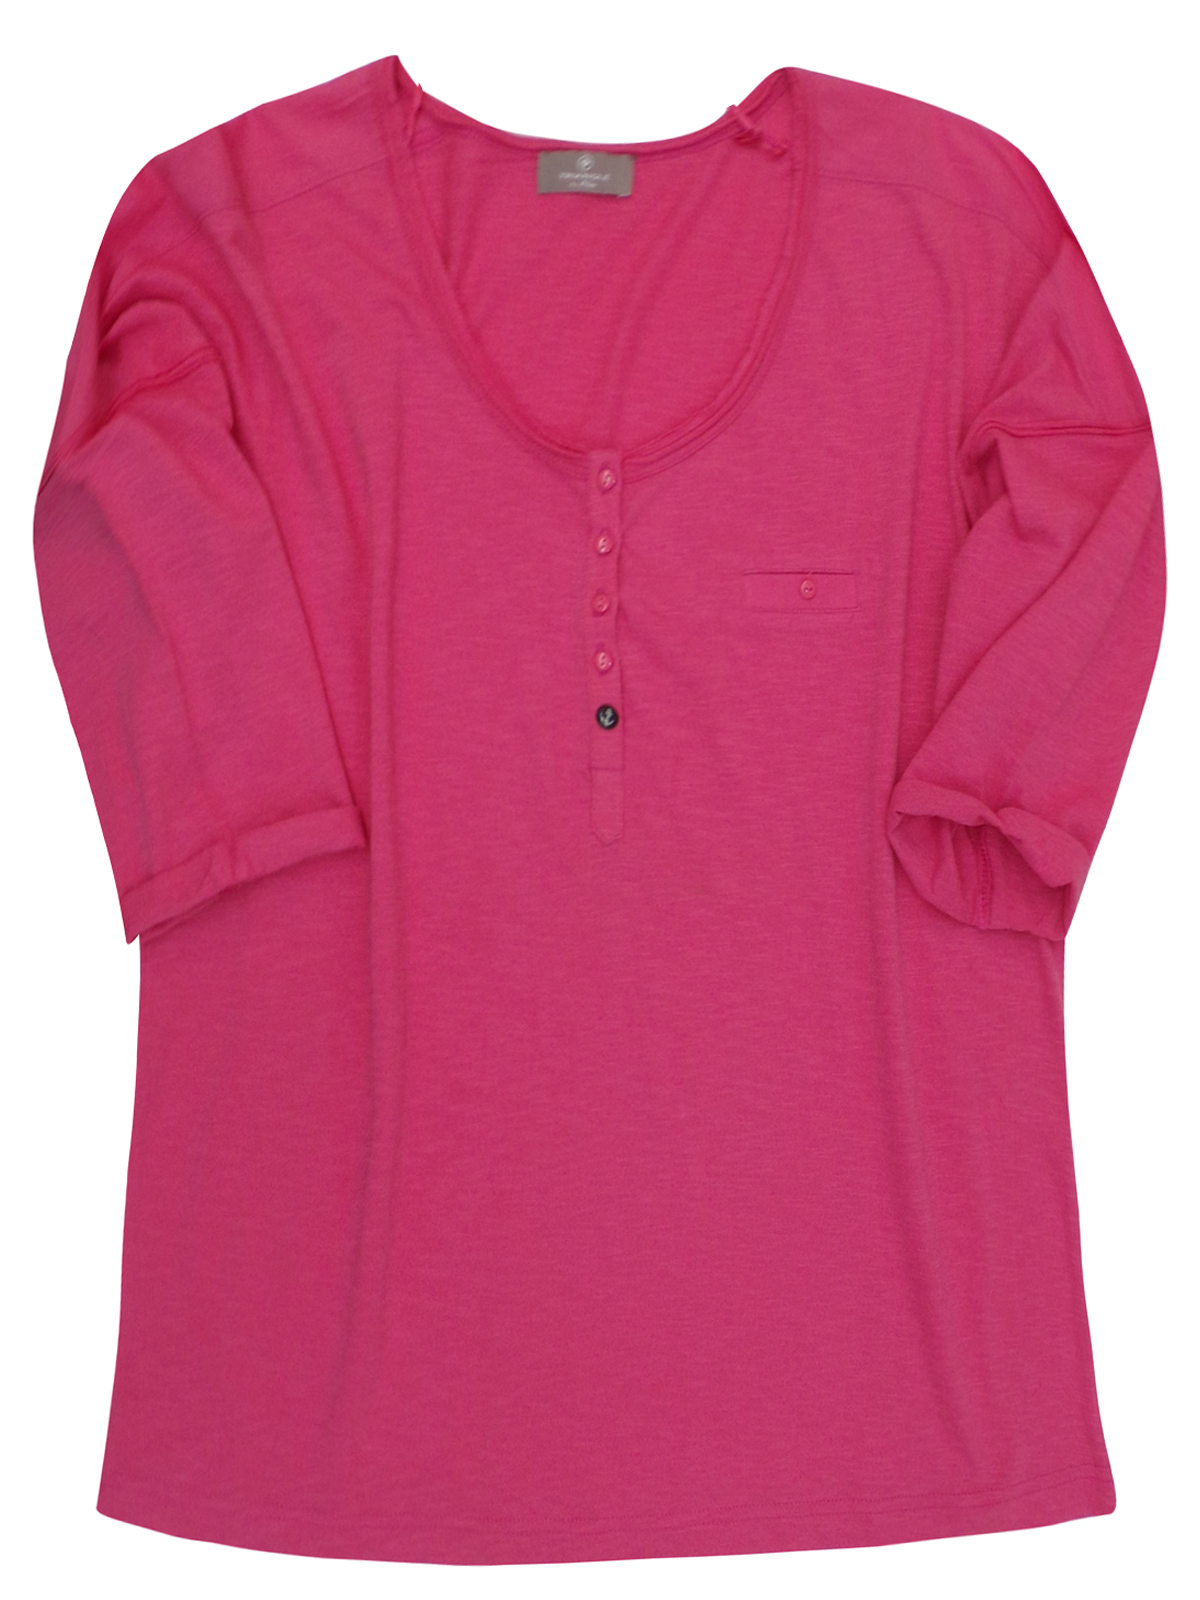 S.Oliver - Triangle - - Triangle SALMON Pure Cotton Drop Shoulder Top ...